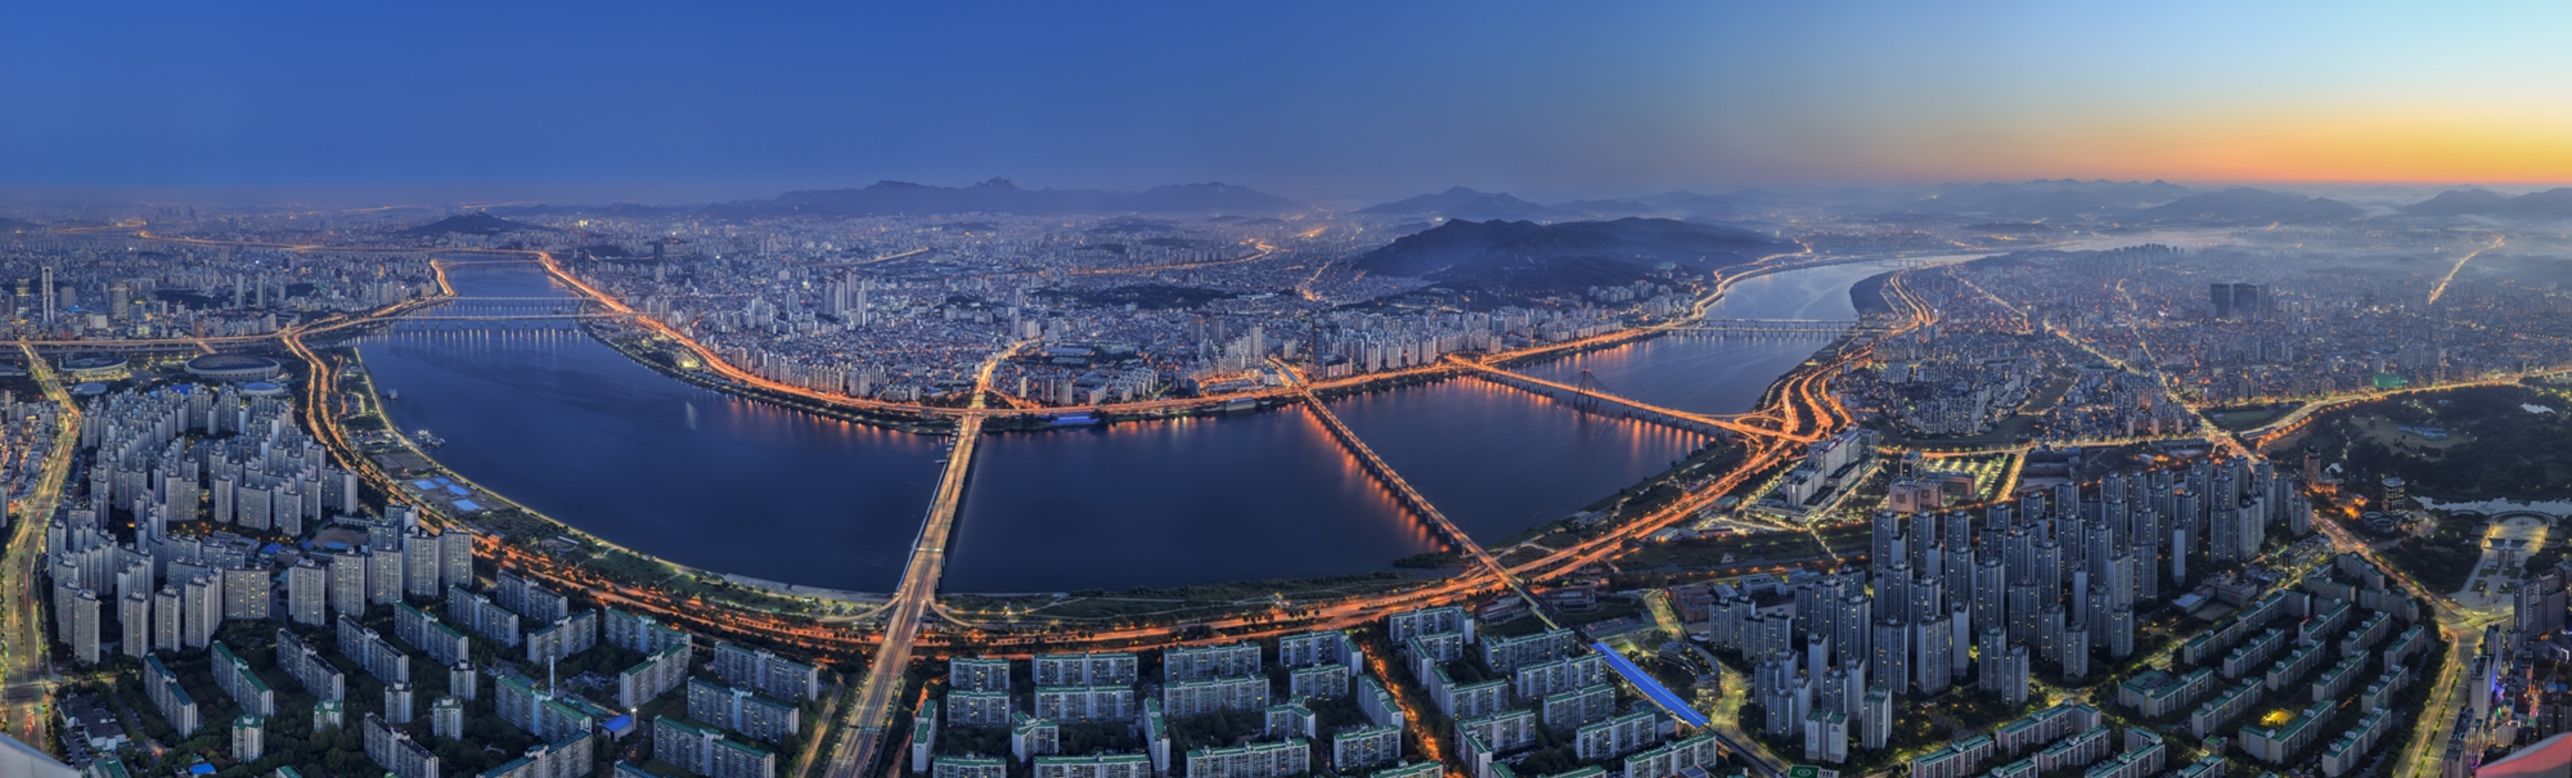 The expansive view overlooks the Seoul cityscape and Cheonggyecheon River, which flows through the heart of the city. 